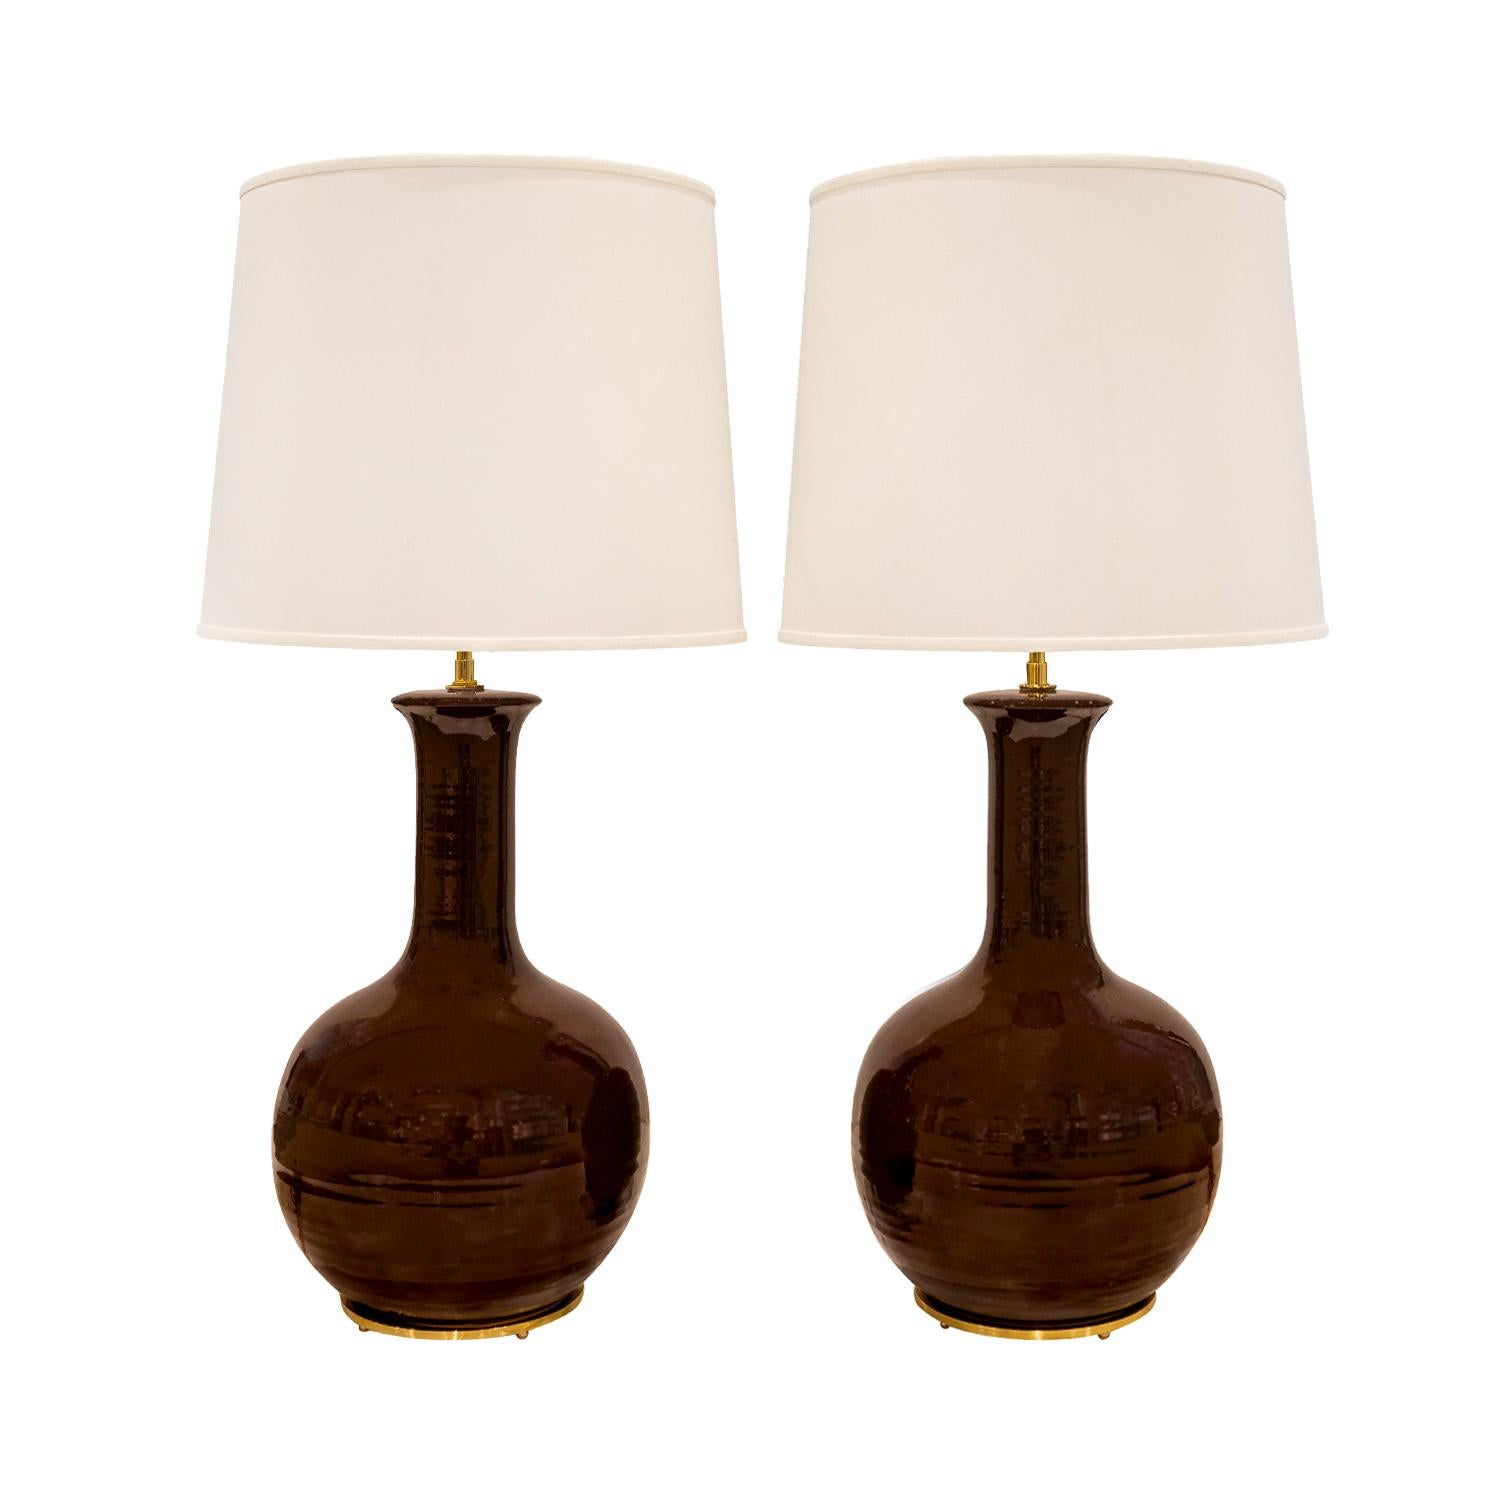 Pair of fine artisan porcelain table lamps with custom polished brass hardware and bases with ball feet, American 1960's.  There are subtle undulations in the body of the lamps.  These are hand-thrown and beautifully made.  Brass has been polished